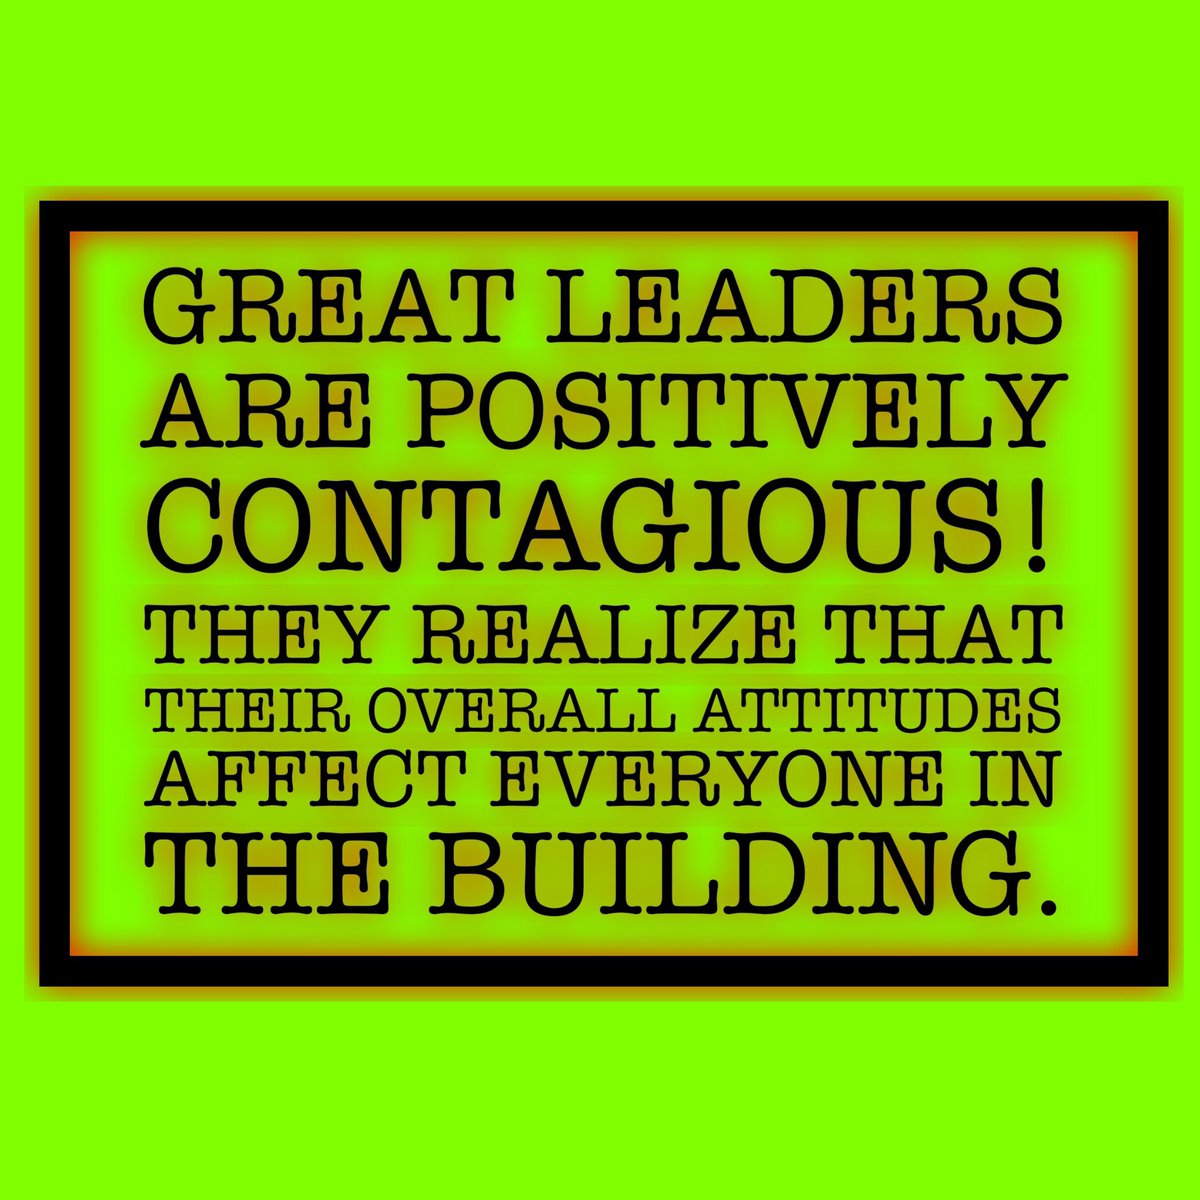 Monday Motivation: BE POSITIVELY CONTAGIOUS!😎